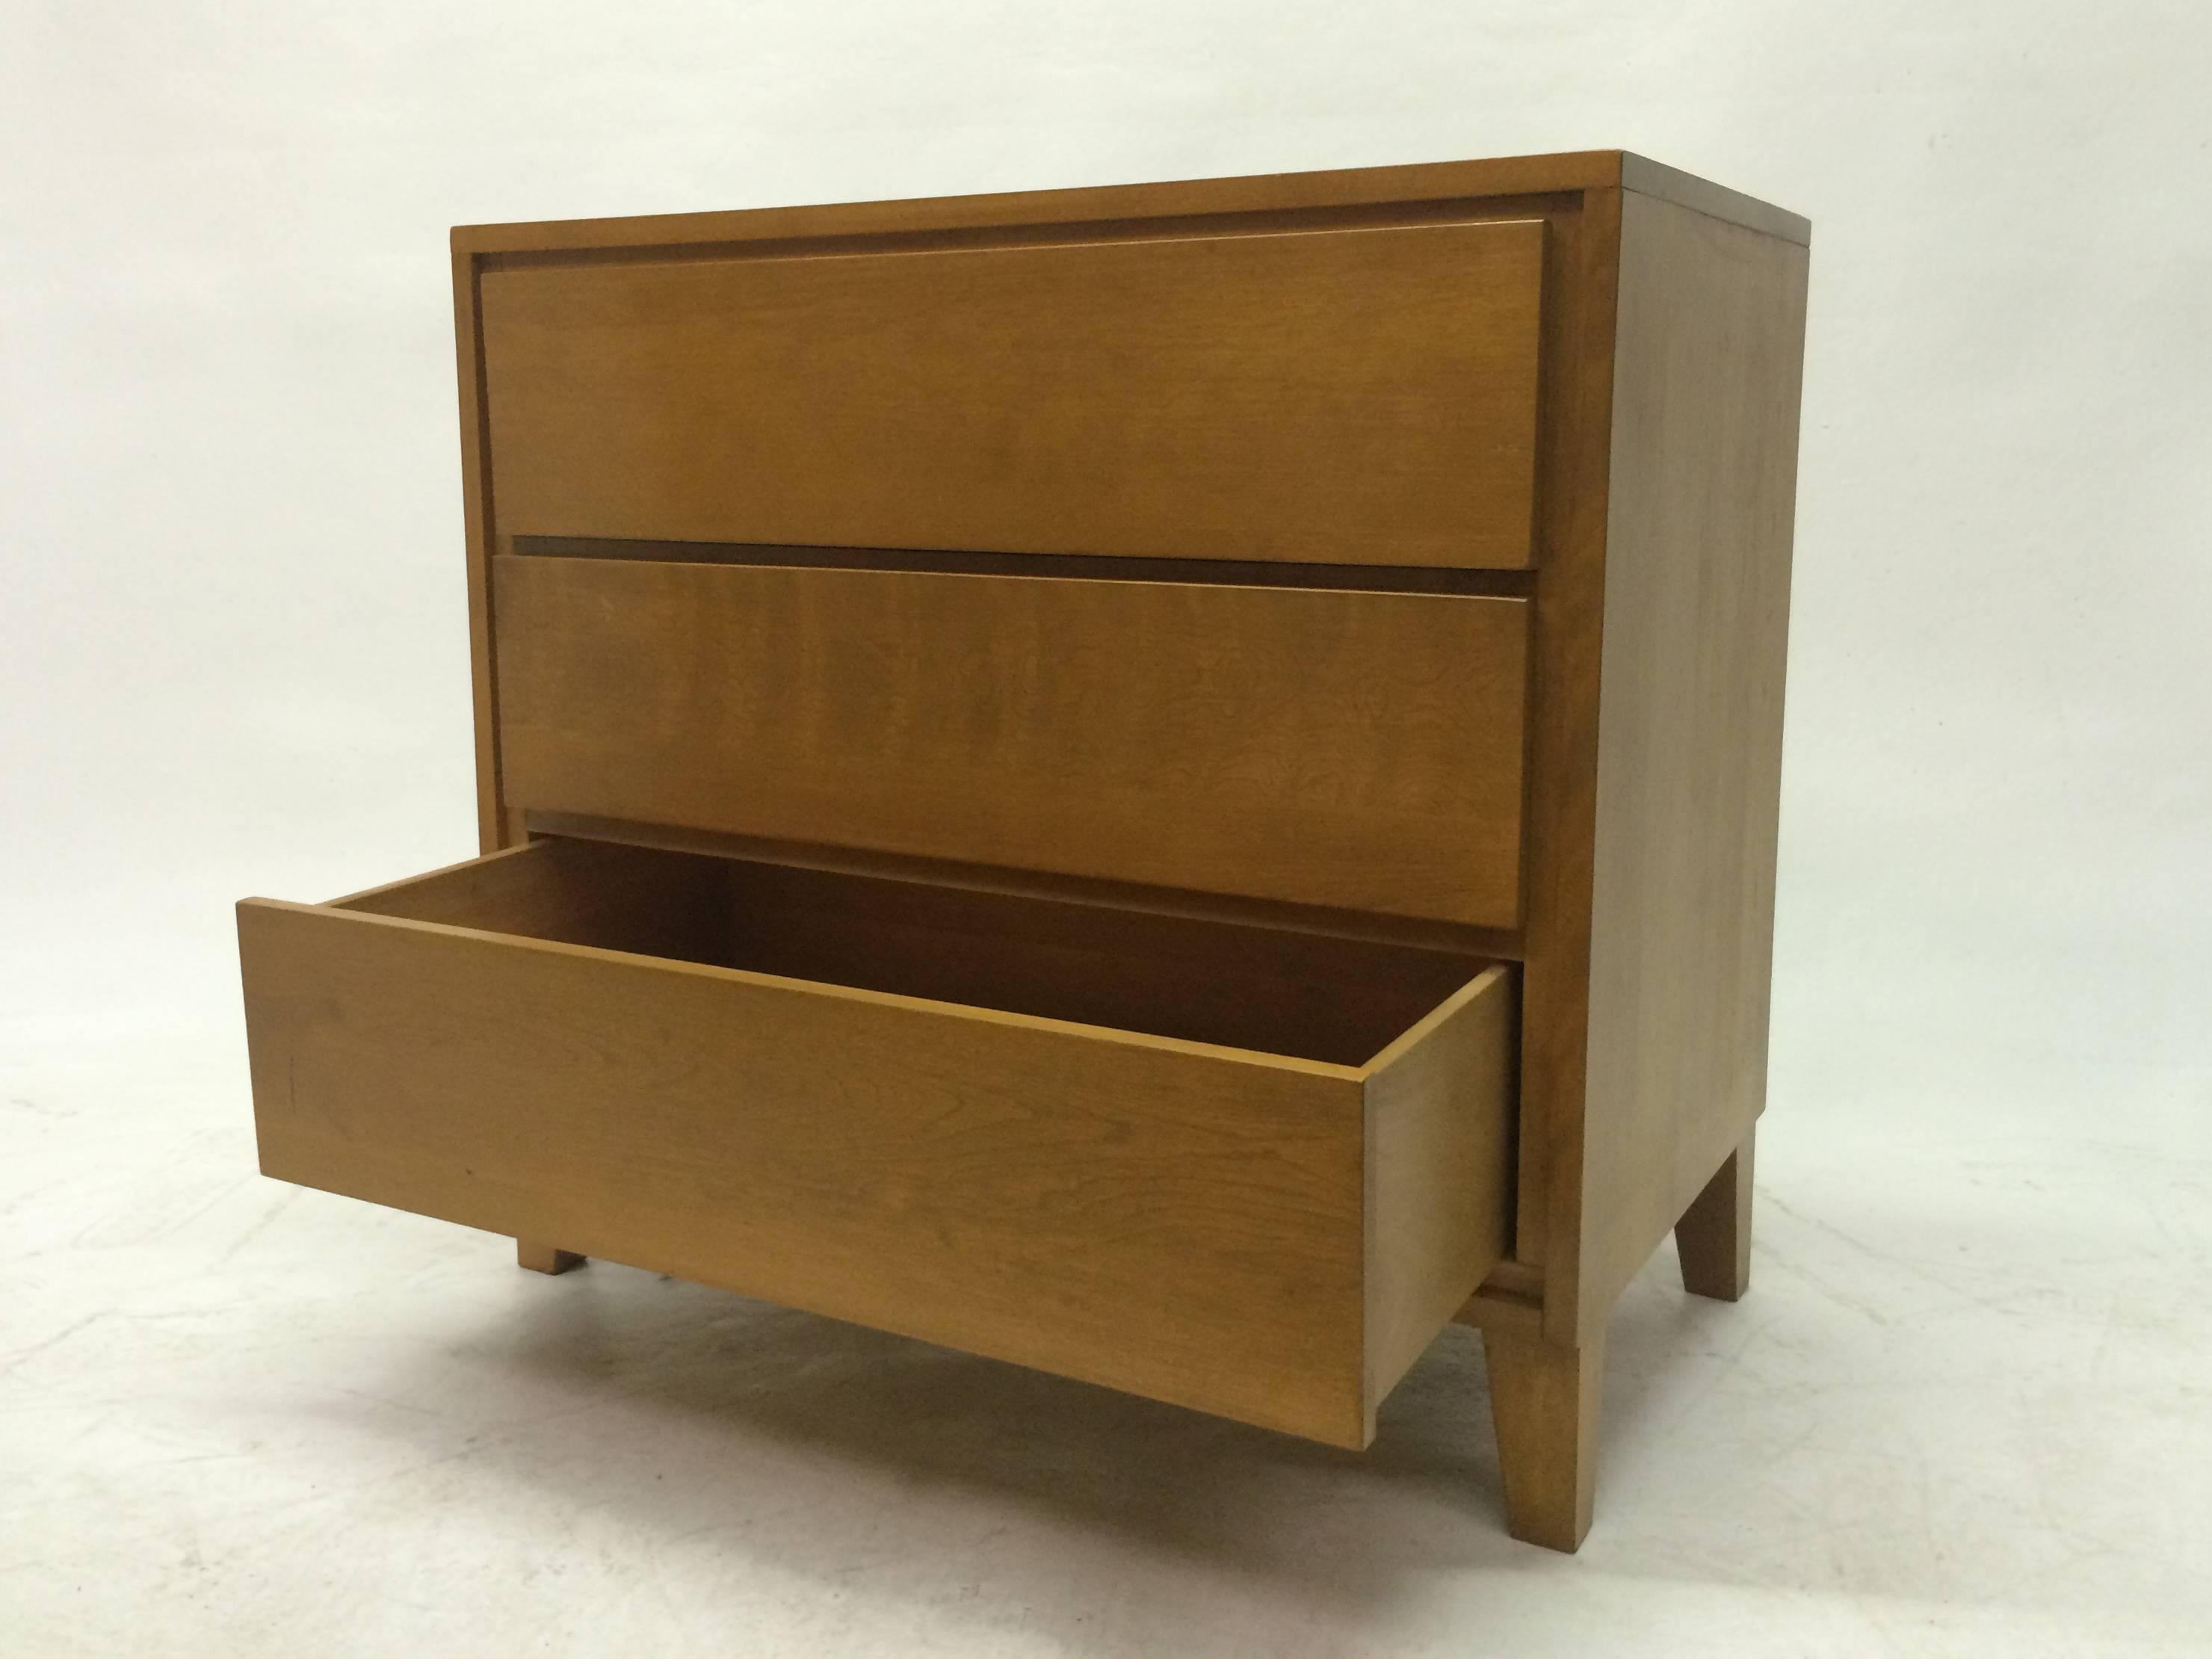 This 1950s designed dresser by Russel Wright for conant ball features three drawers made of solid maple. Russell Wright was an American industrial designer working during the early 20th century. He helped bring modern design to the North America